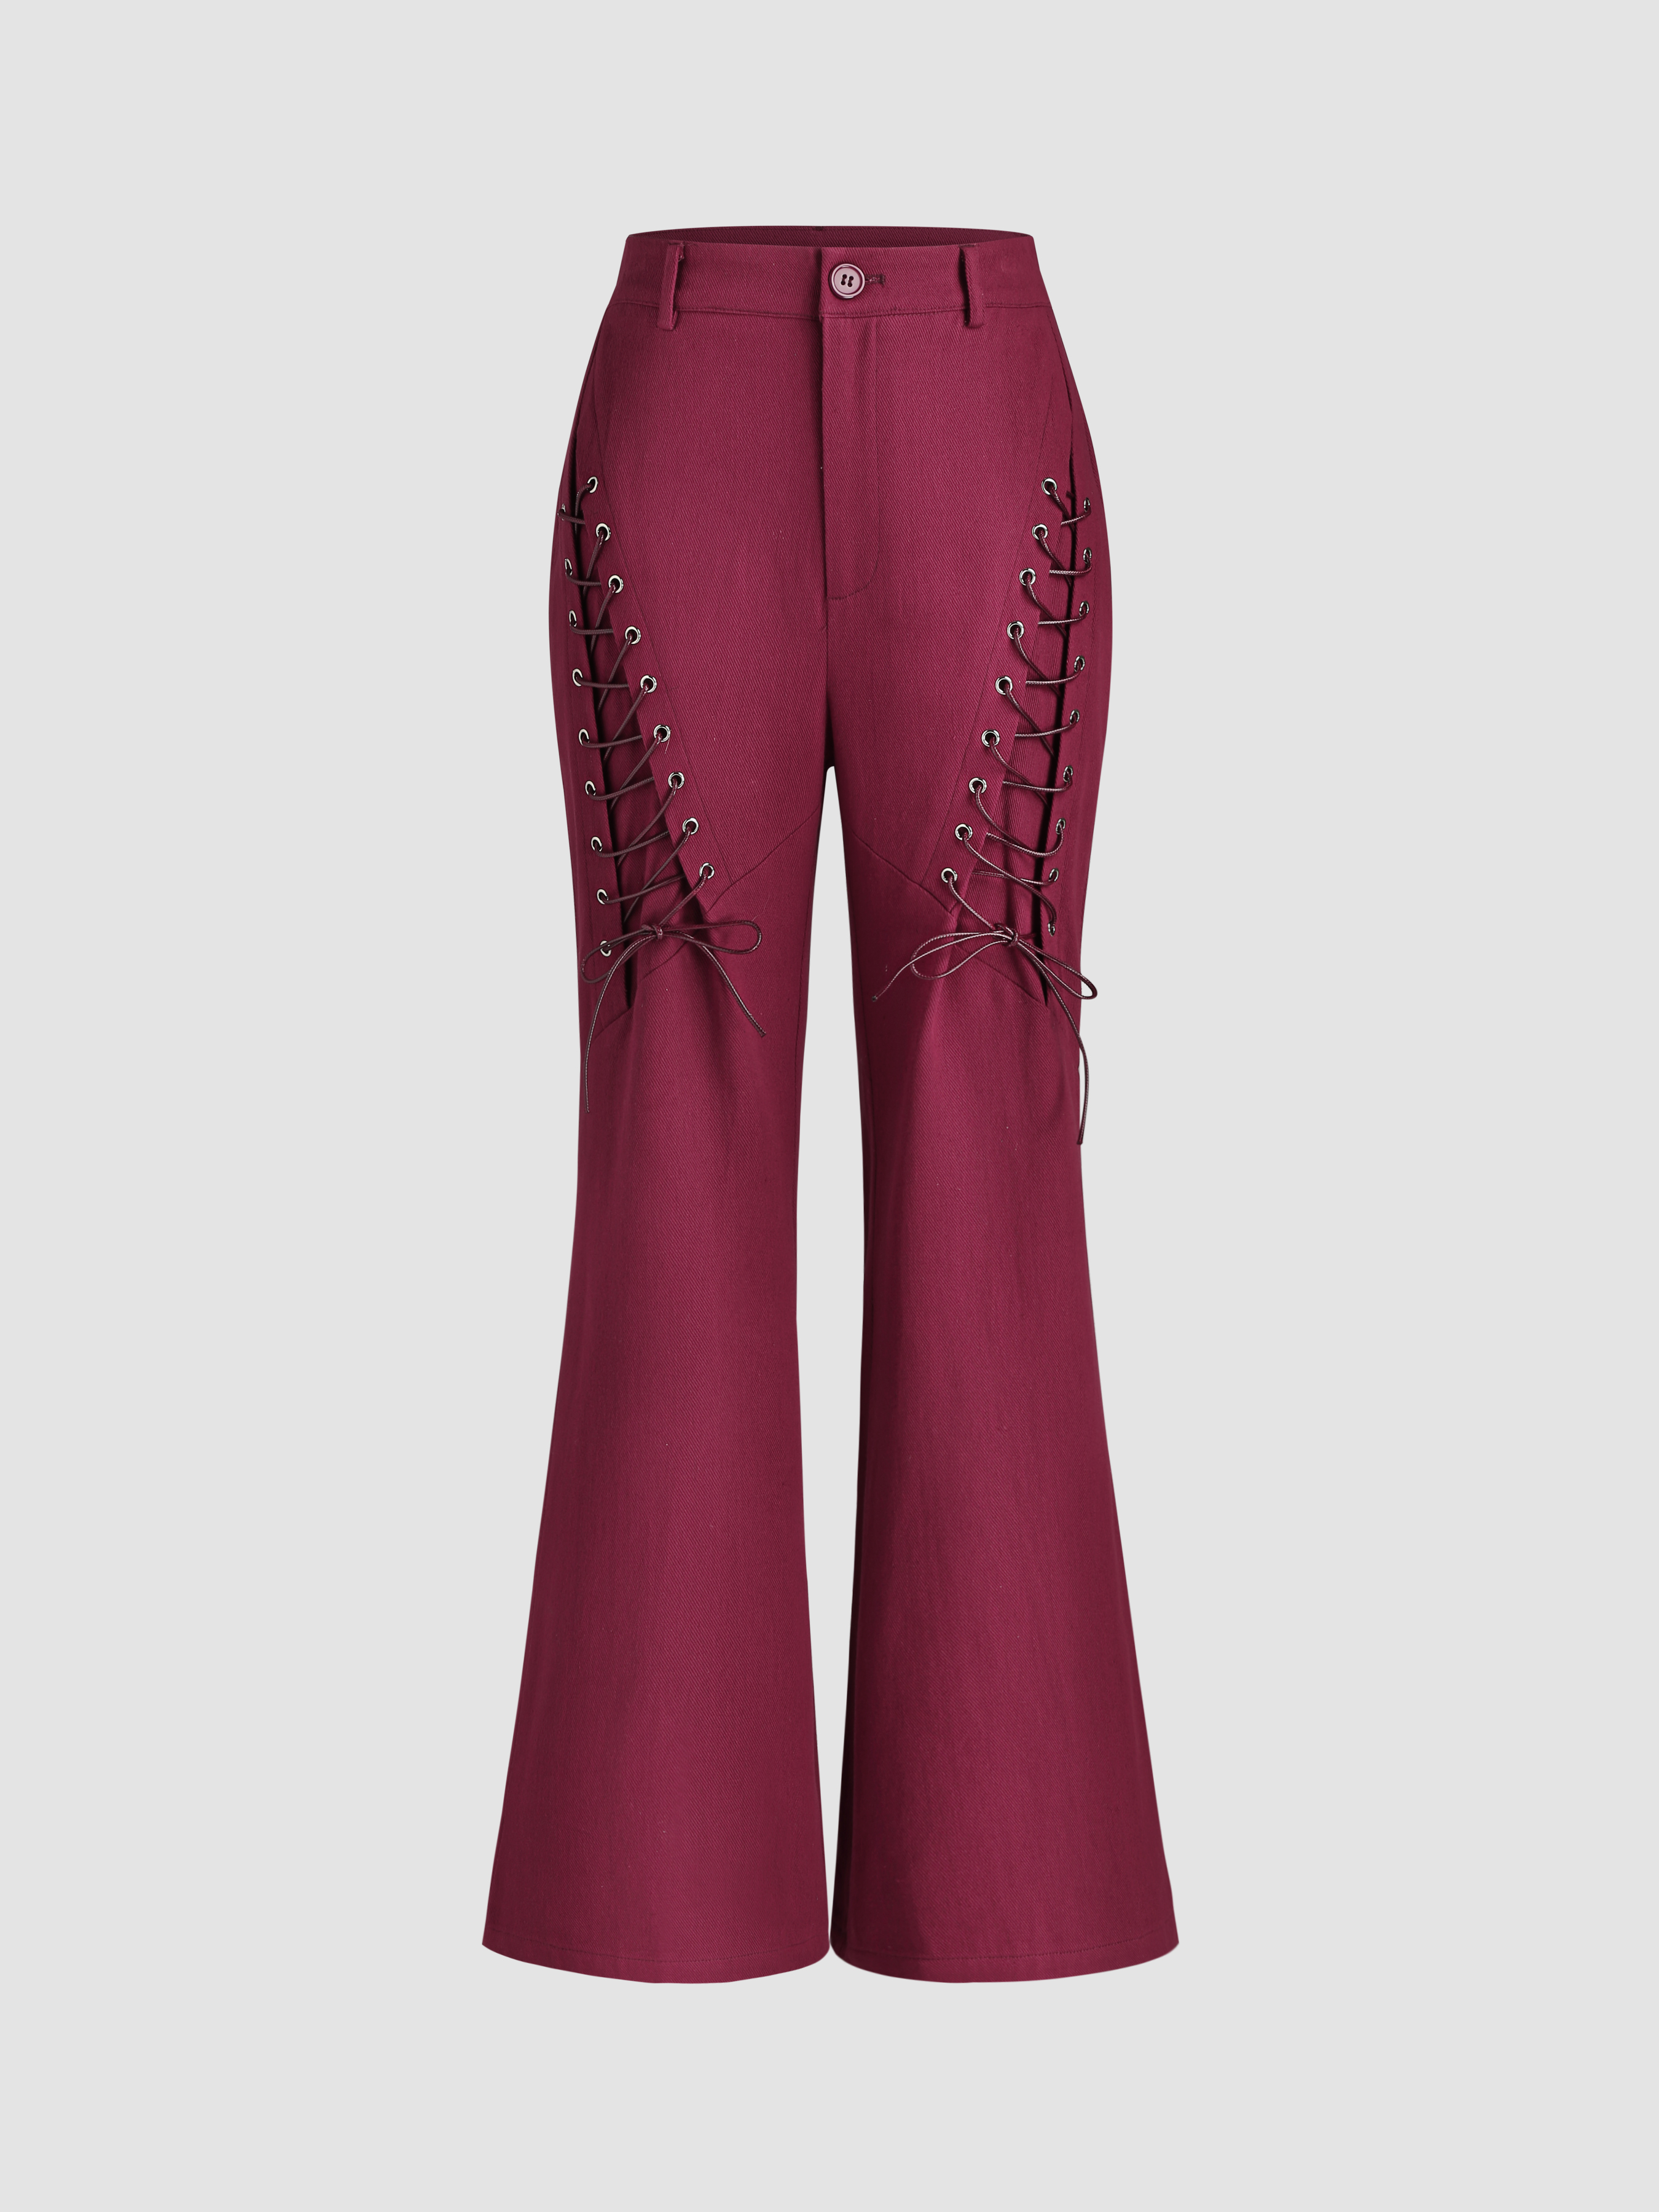 Women's Trendy Casual Solid Color High Waist Lace-Up Loose Trousers Long Pants  Pants For Women Jeans Fall Black S - Walmart.com